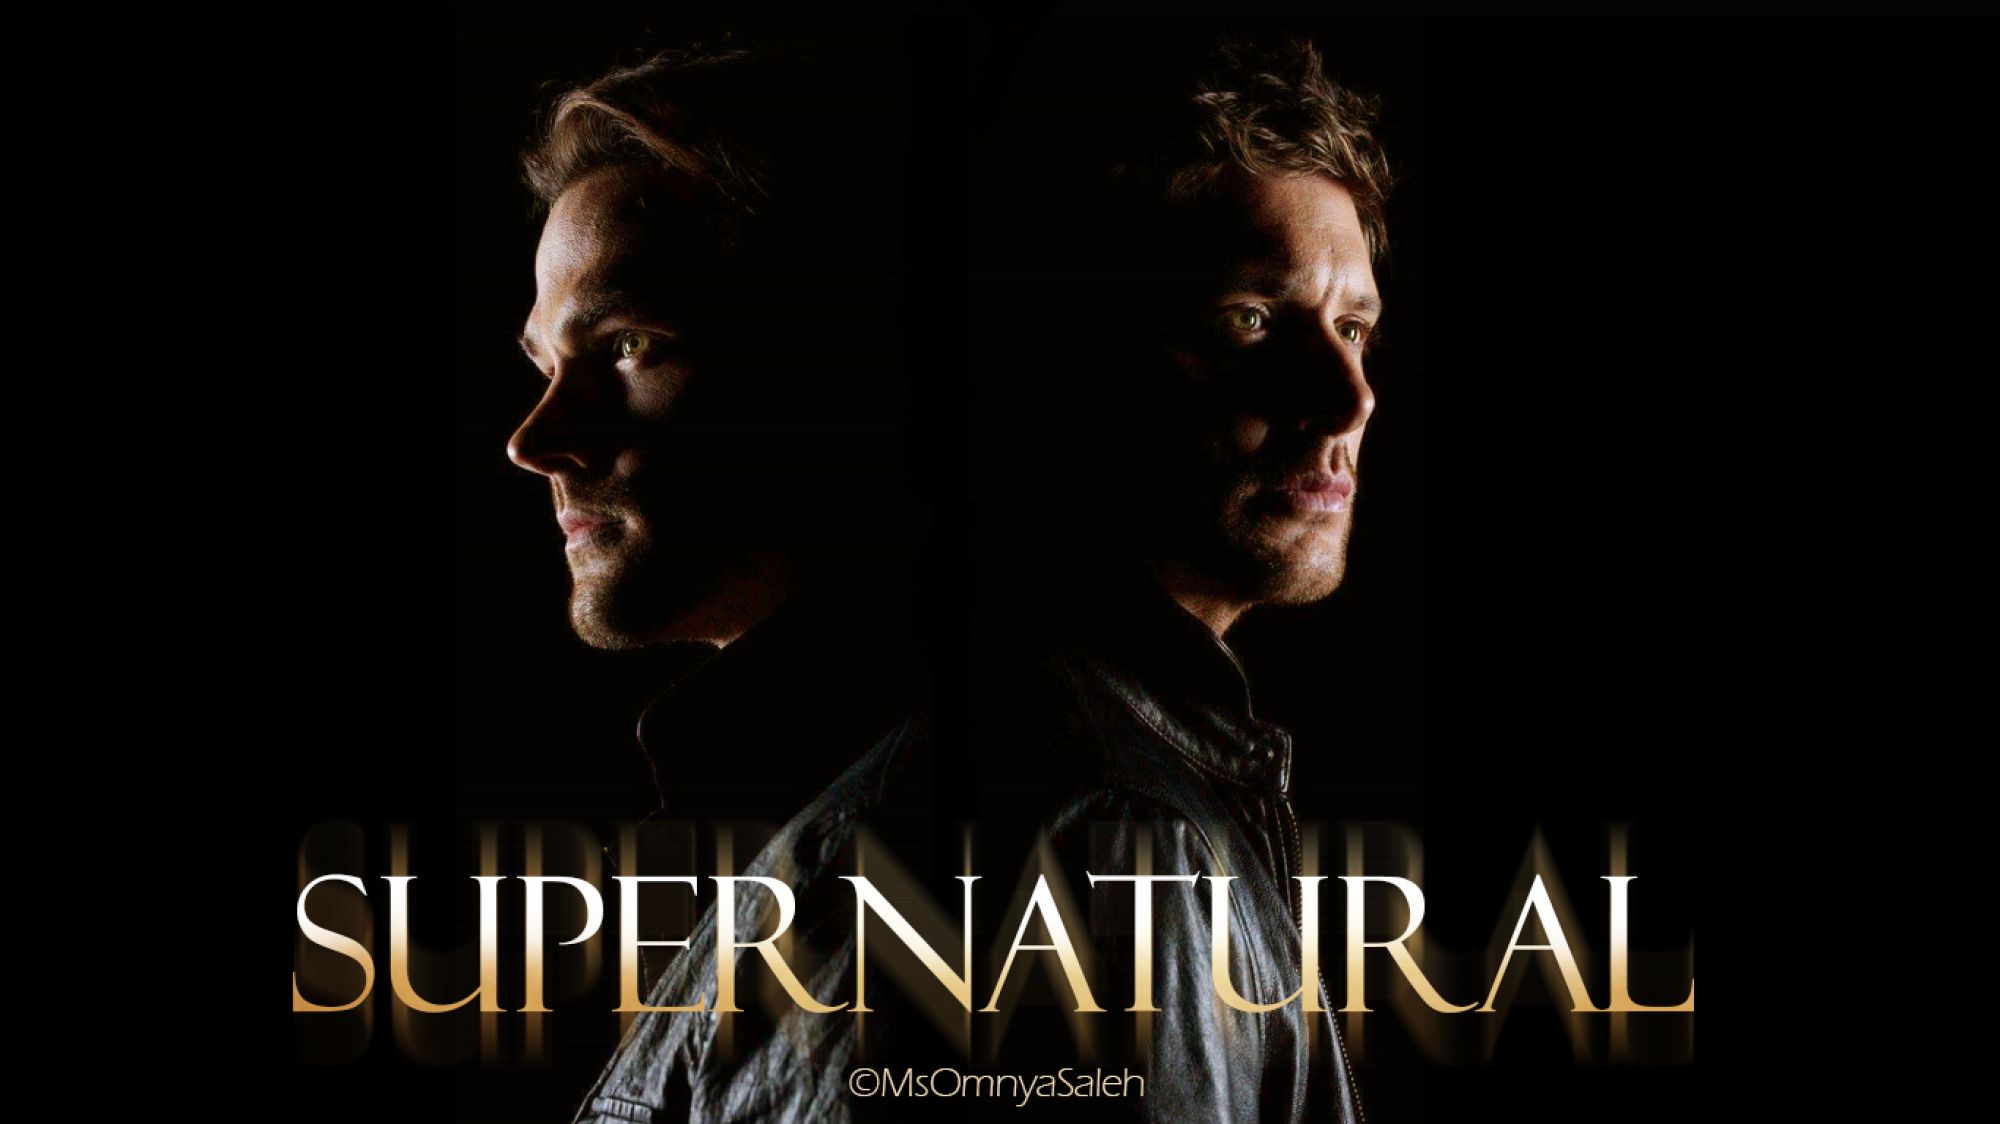 Photograph poster showing the characters - Sam and Dean shrouded in darknesses